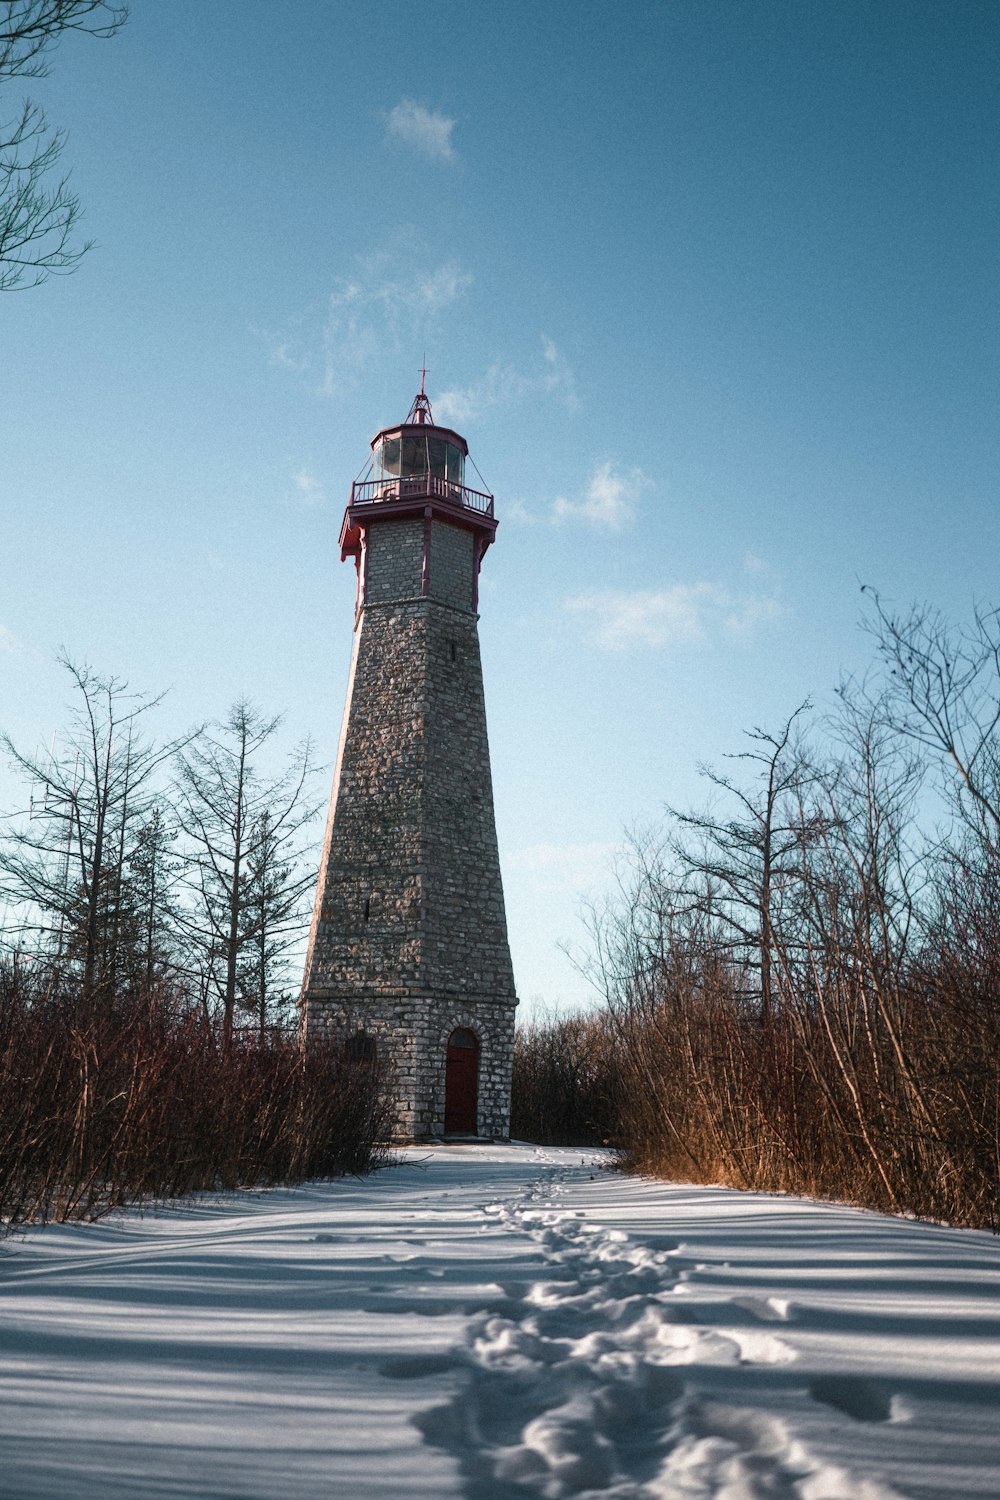 a light house in the middle of a snowy field